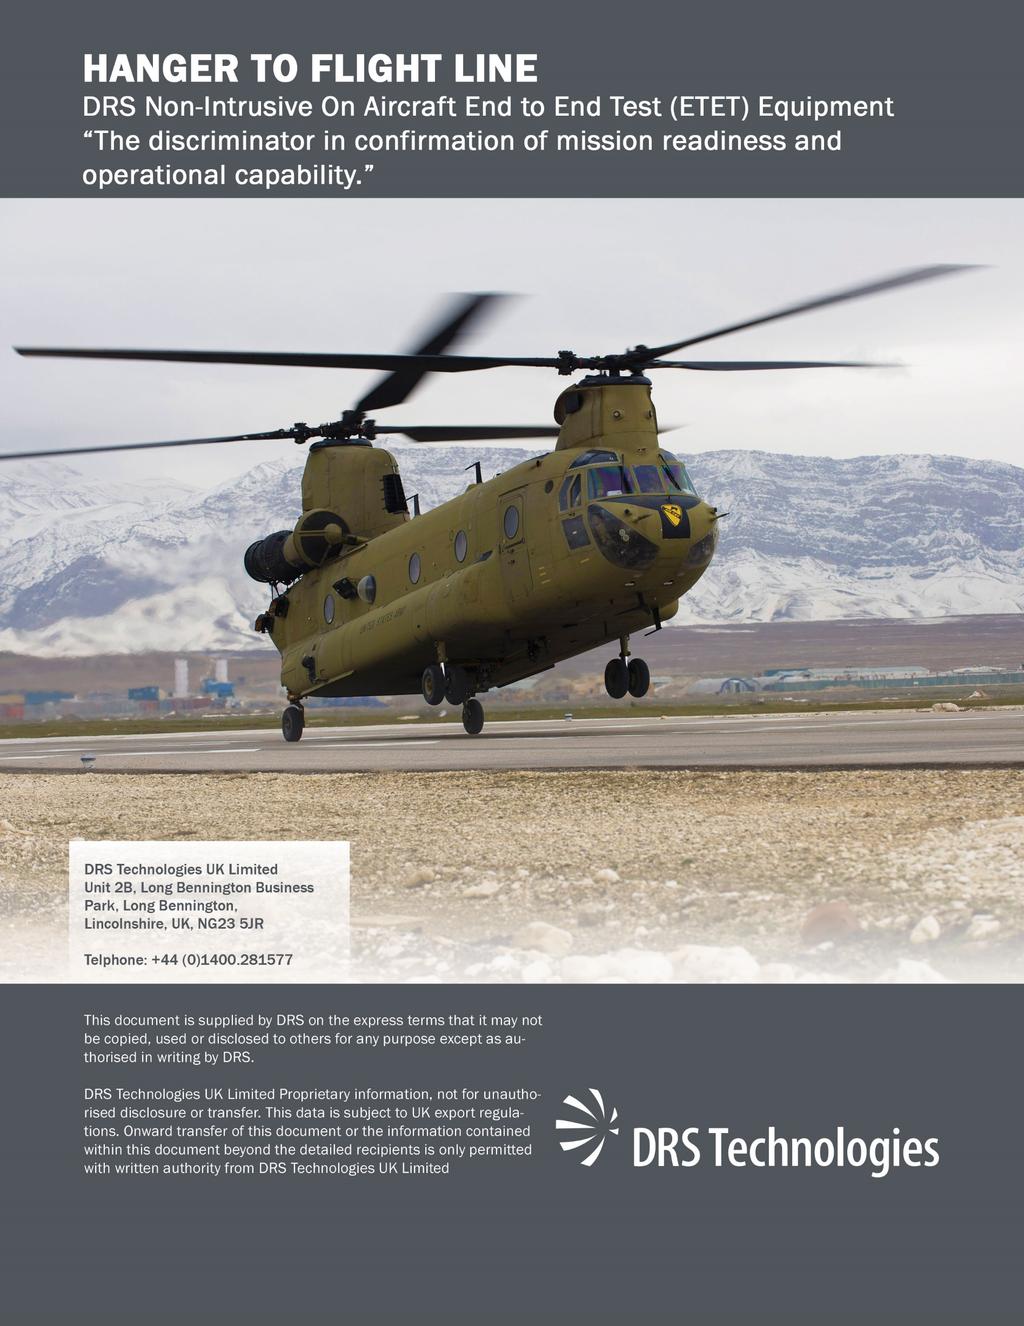 Warfighter Information Network Solicitation #: W15P7T-13-R0059 DRS Network and Imaging Systems May 17, 2013 AirSystems_Tiered Testing_White Paper_MicrositeVersion_v2.